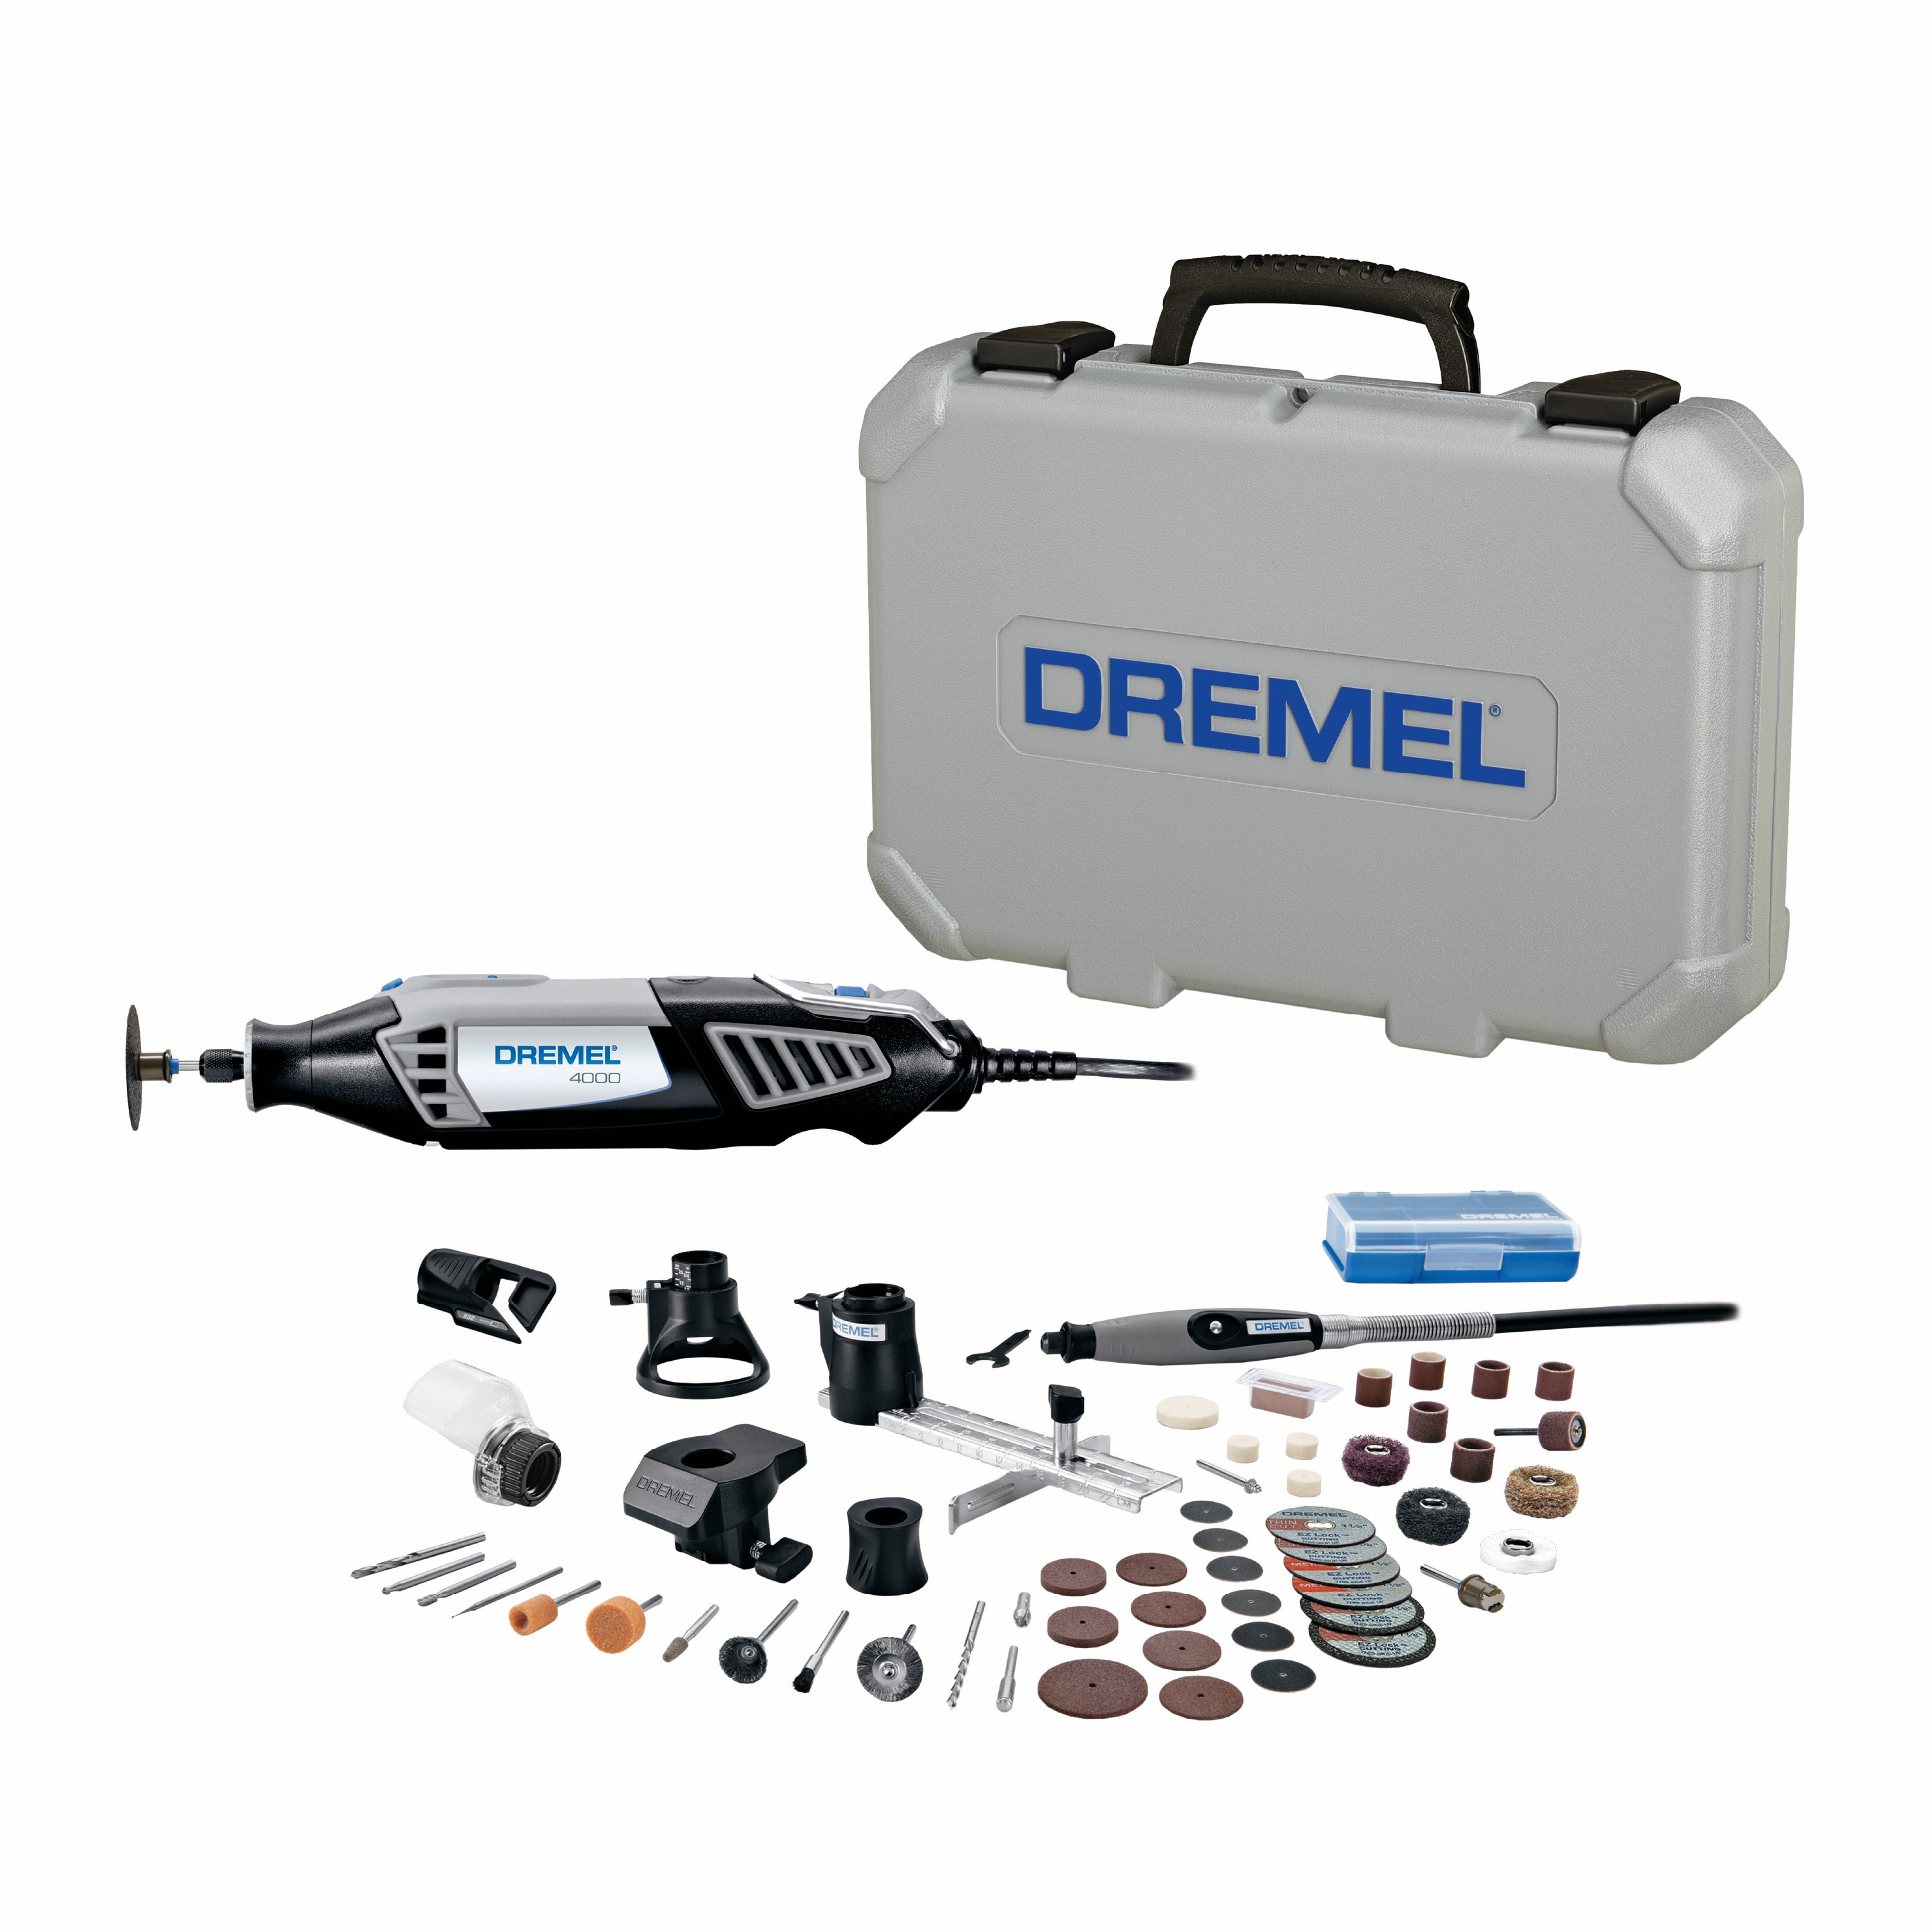 Dremel 4000 56-Piece Variable Speed Corded 1.6-Amp Multipurpose Rotary Tool with Case in the Rotary department at Lowes.com